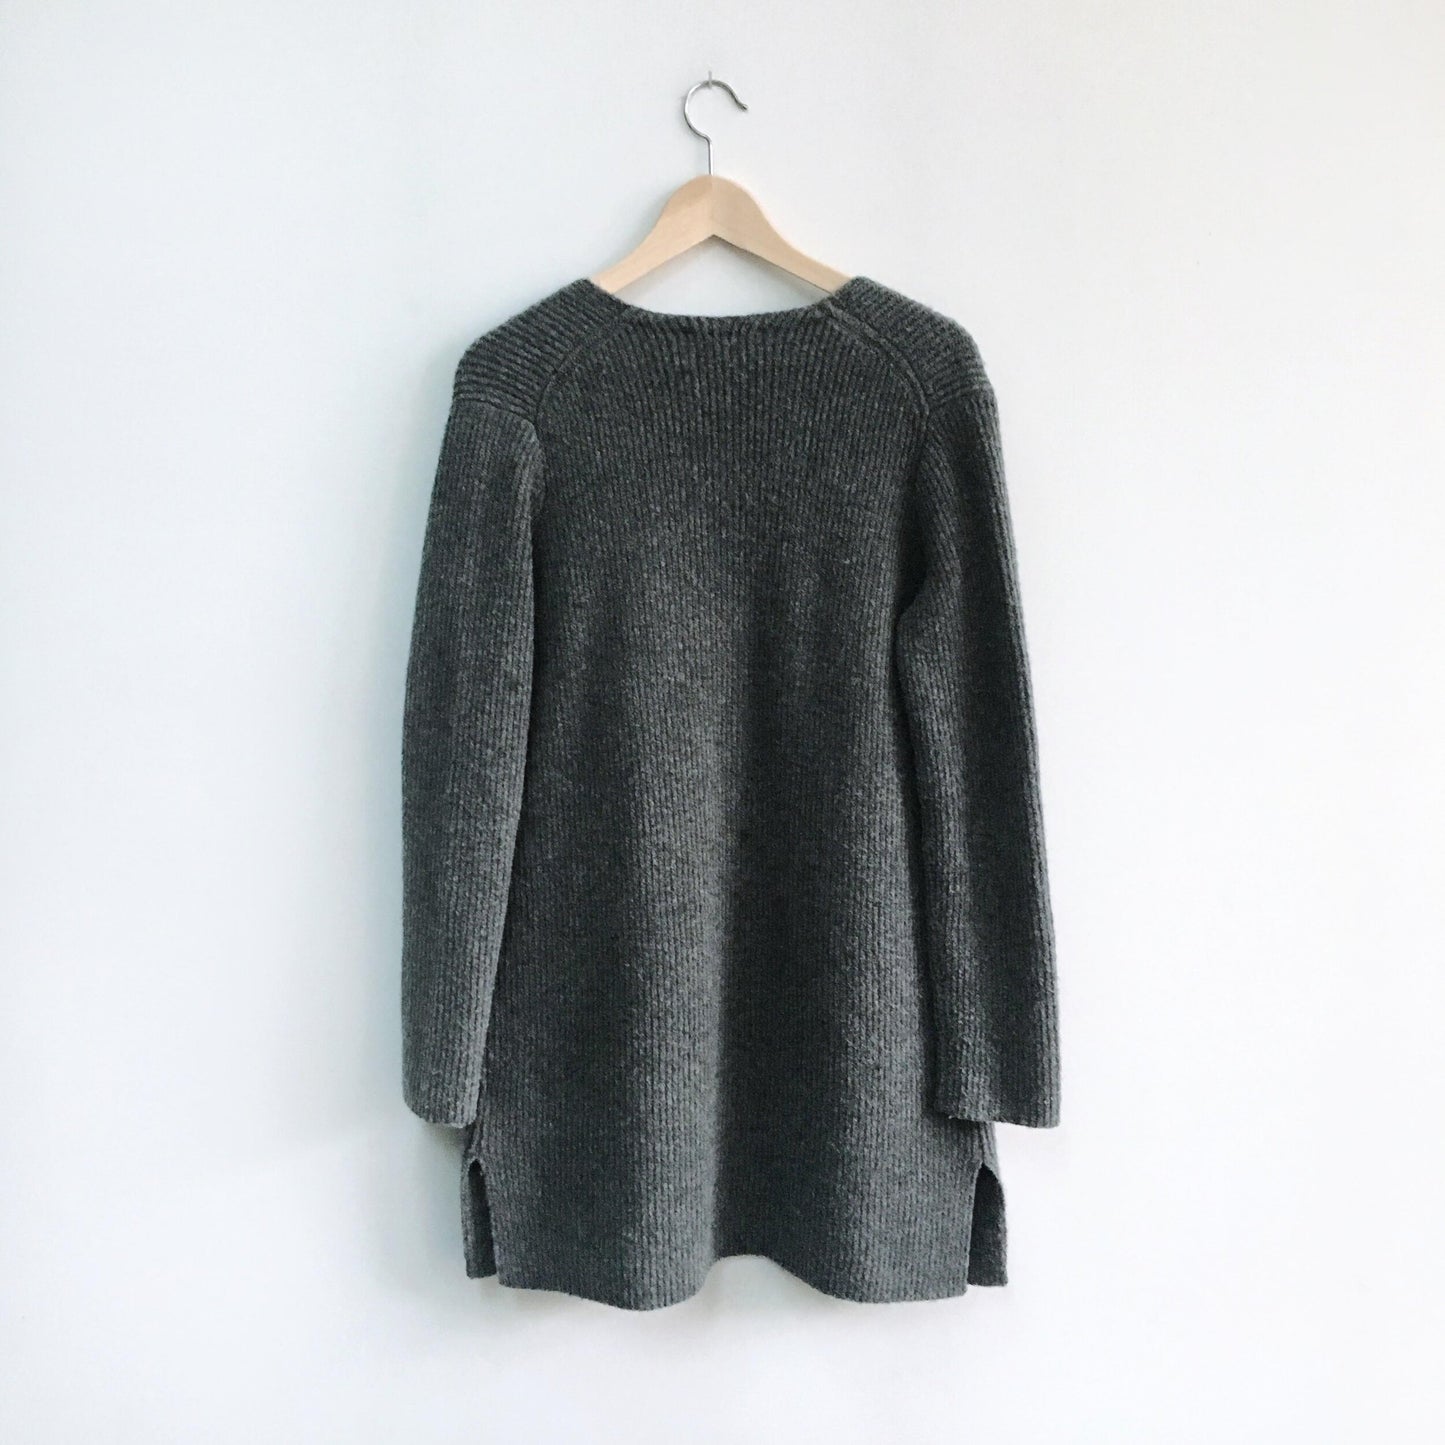 Madewell Dylan Cardigan - size xs